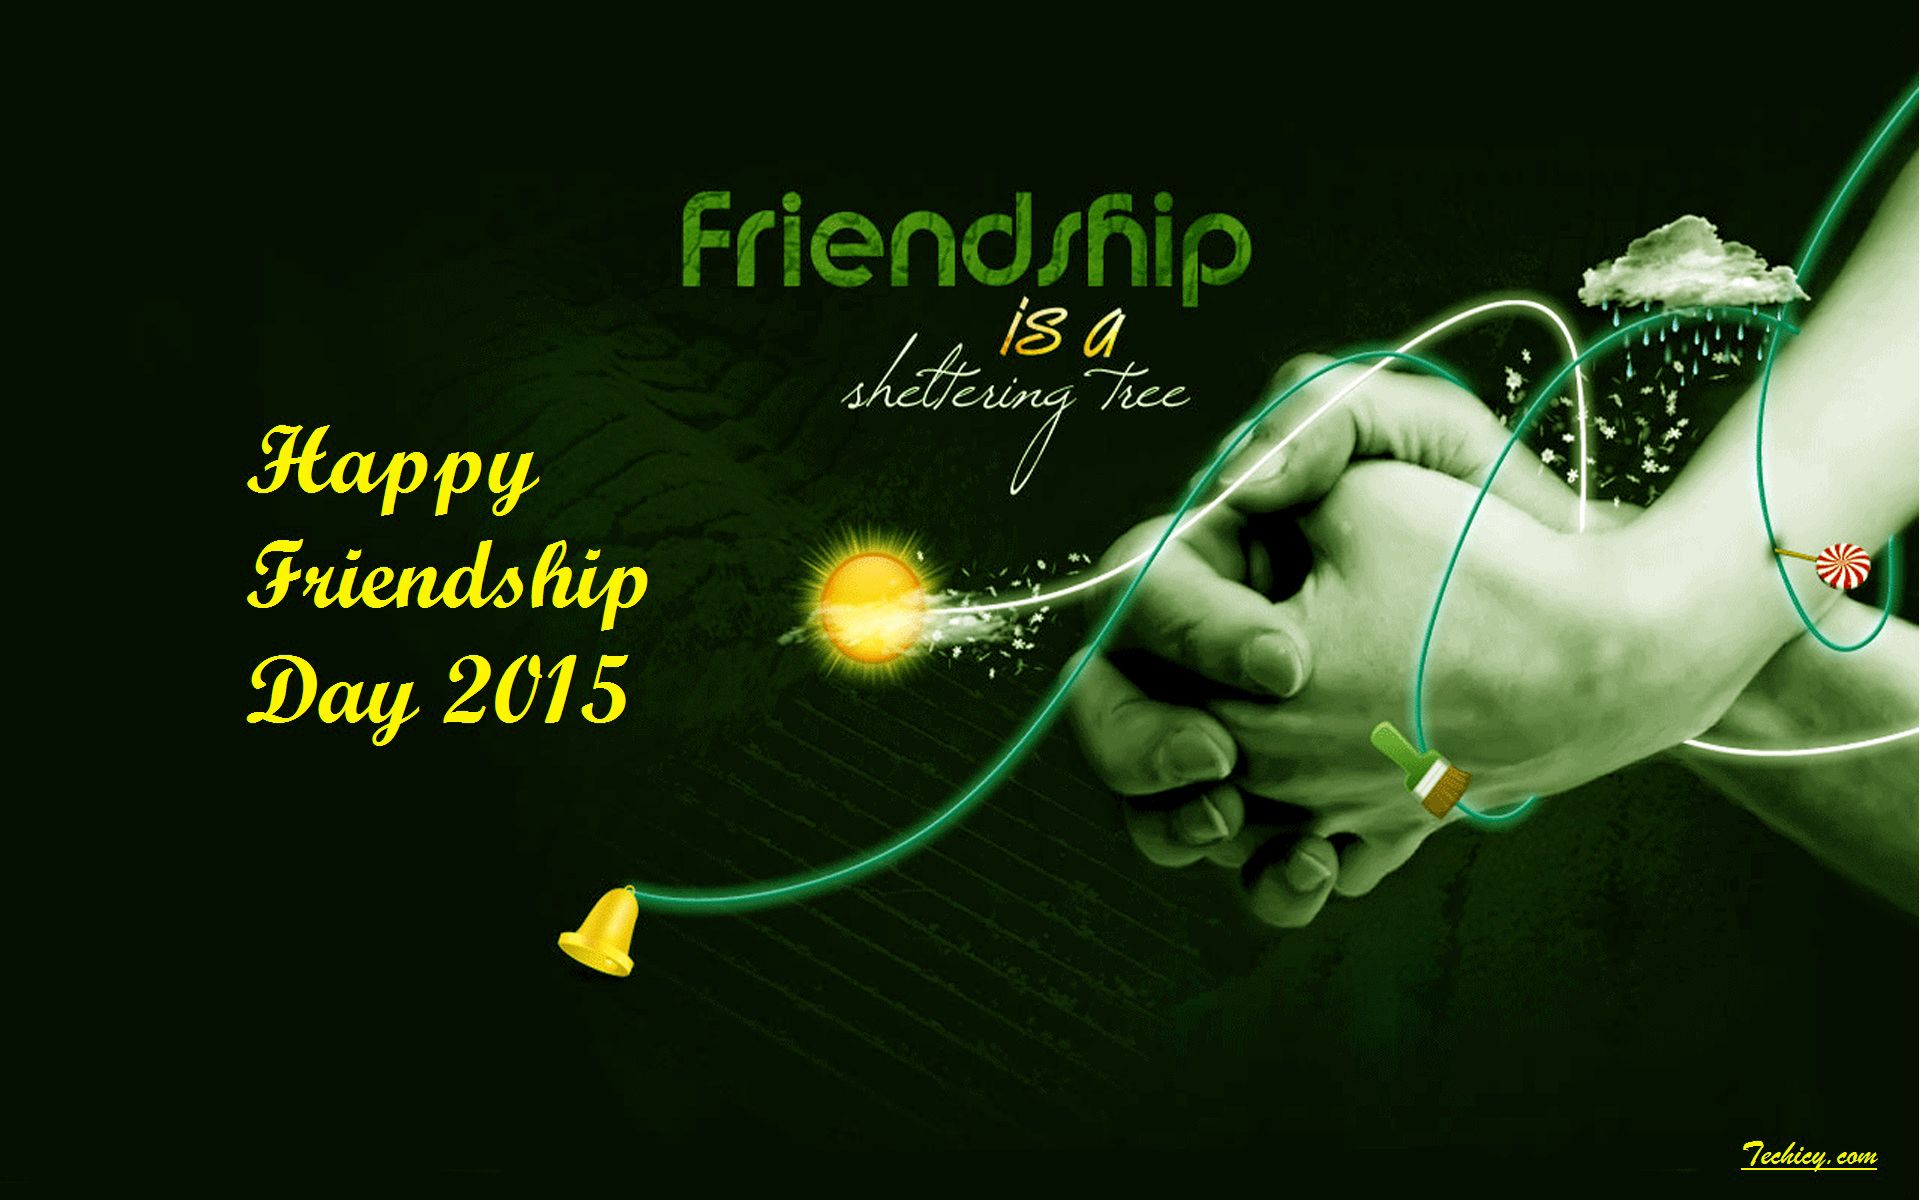 Happy* Friendship Day HD Images, Wallpapers, Pics, and Photos ...